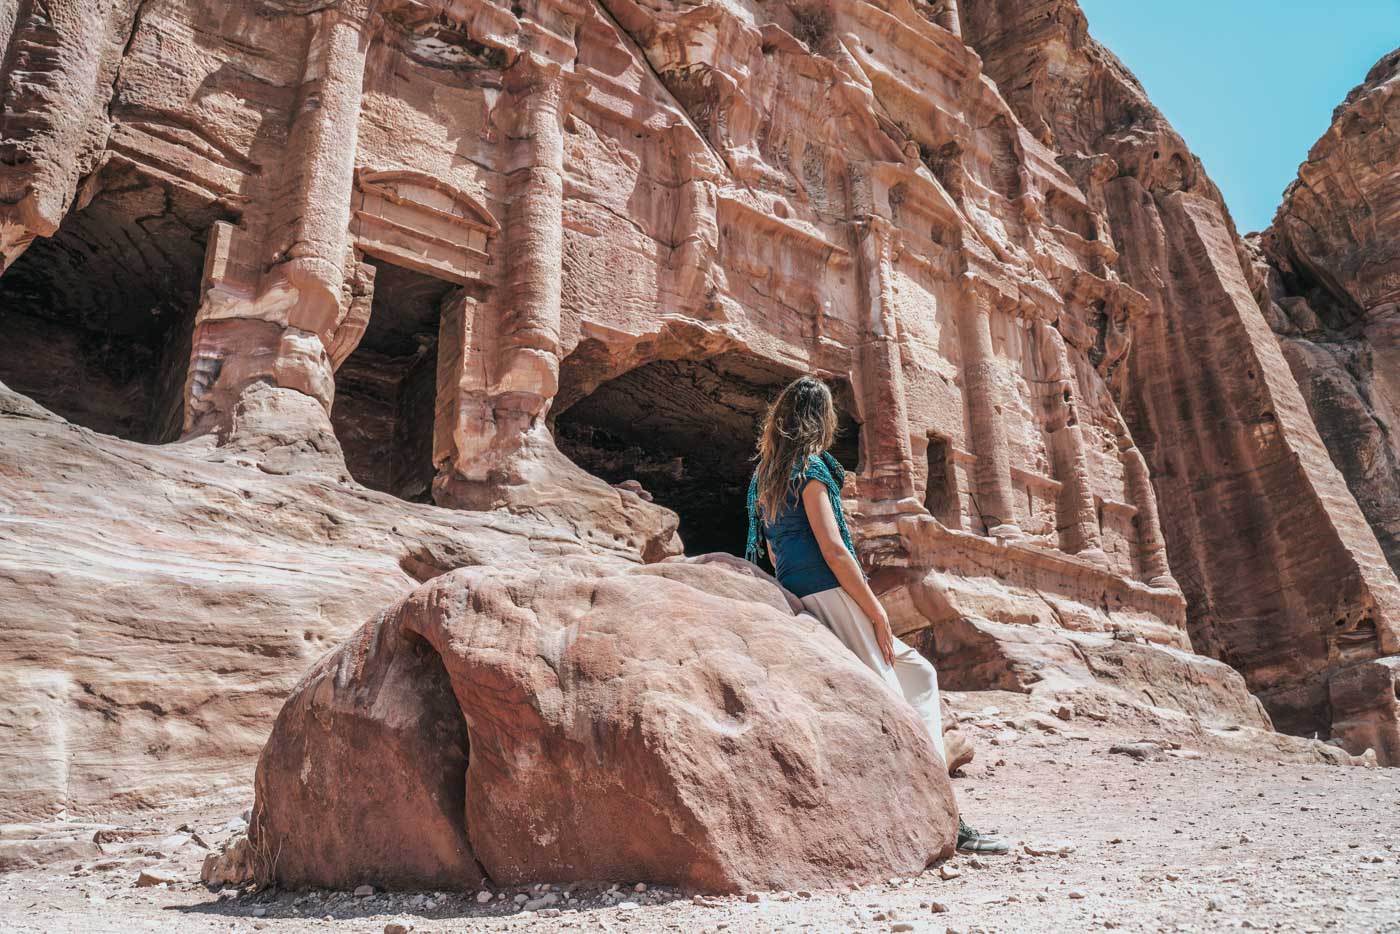 Ecotourism in Jordan is on the rise